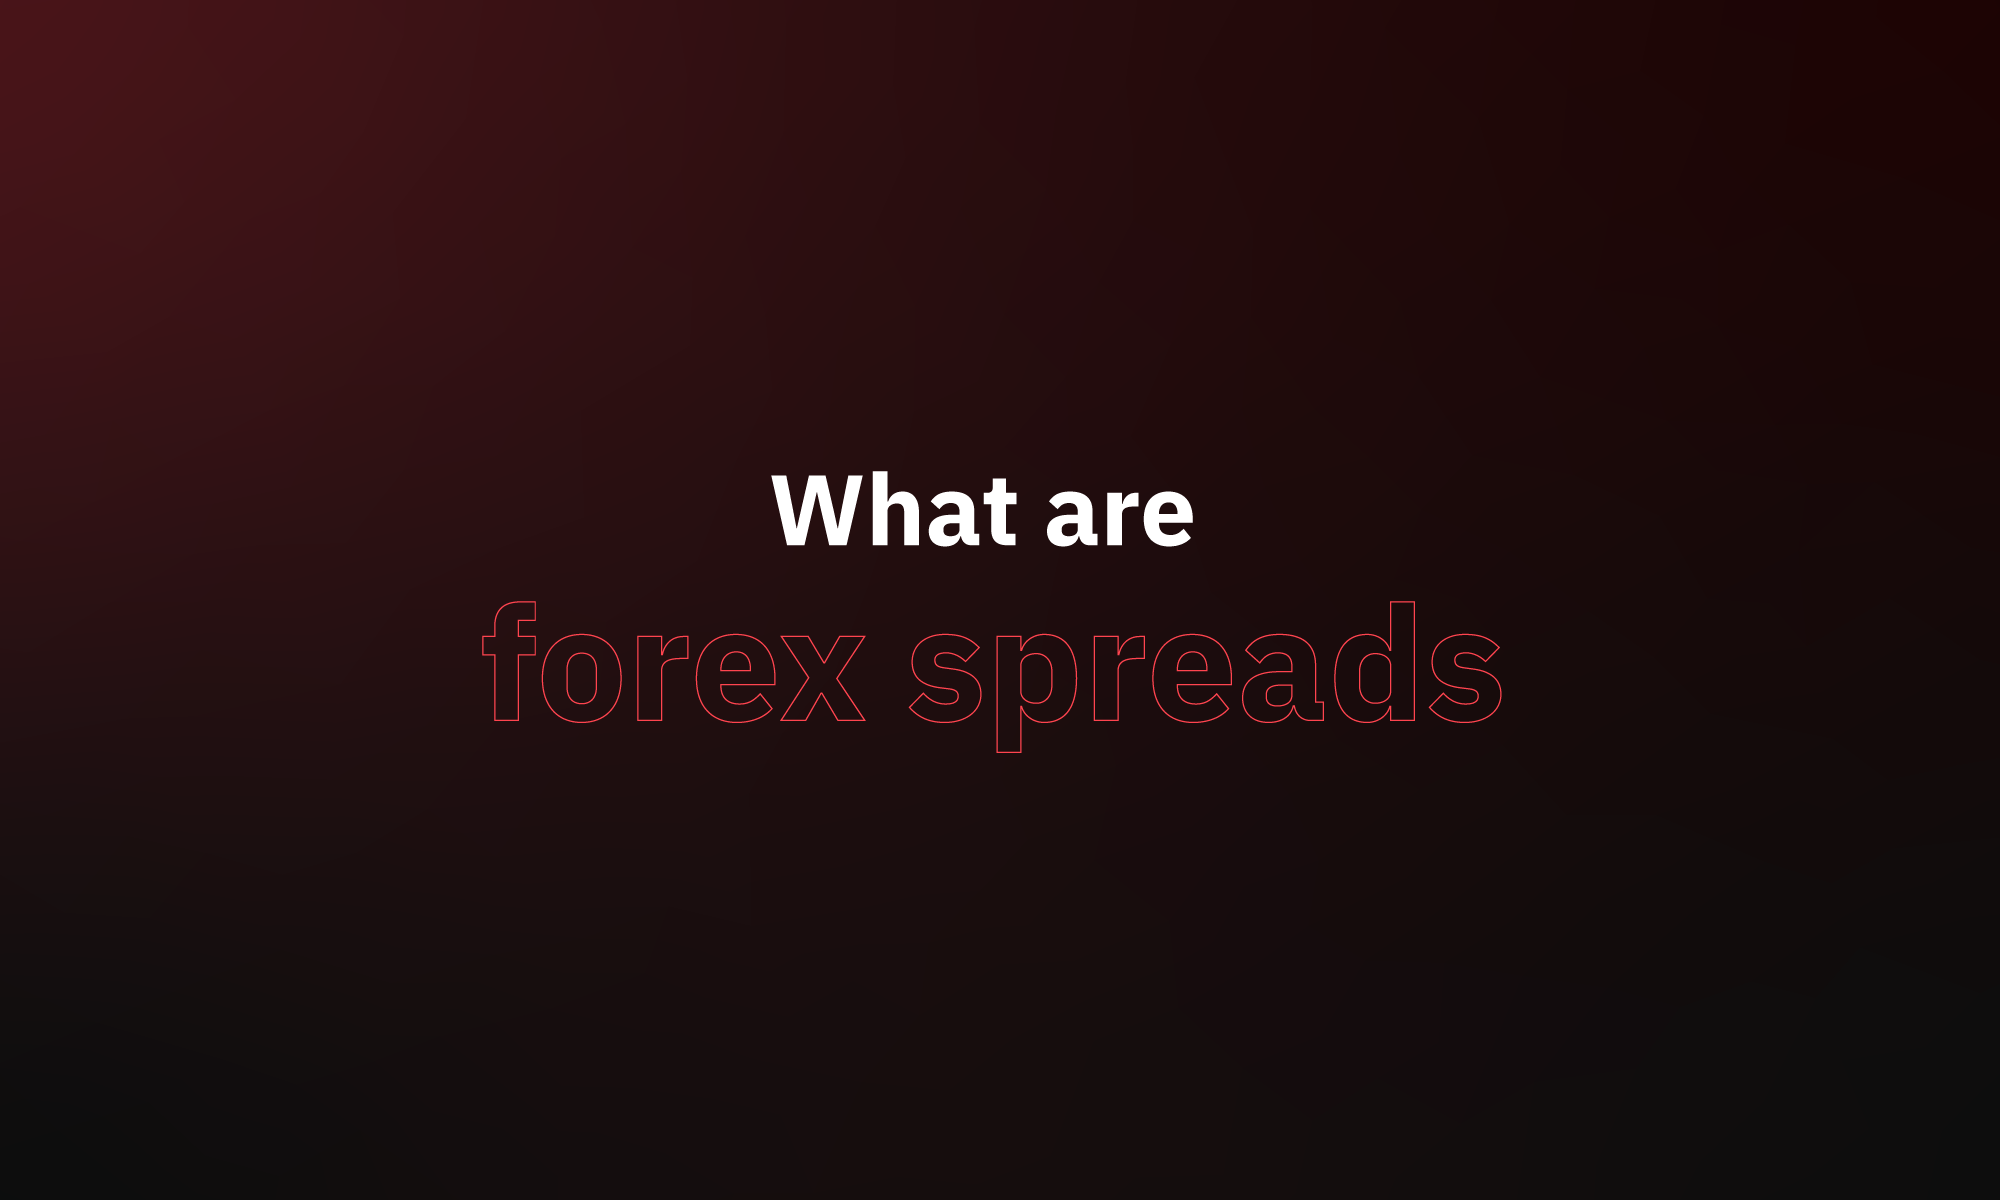 text that says "what are forex spreads"